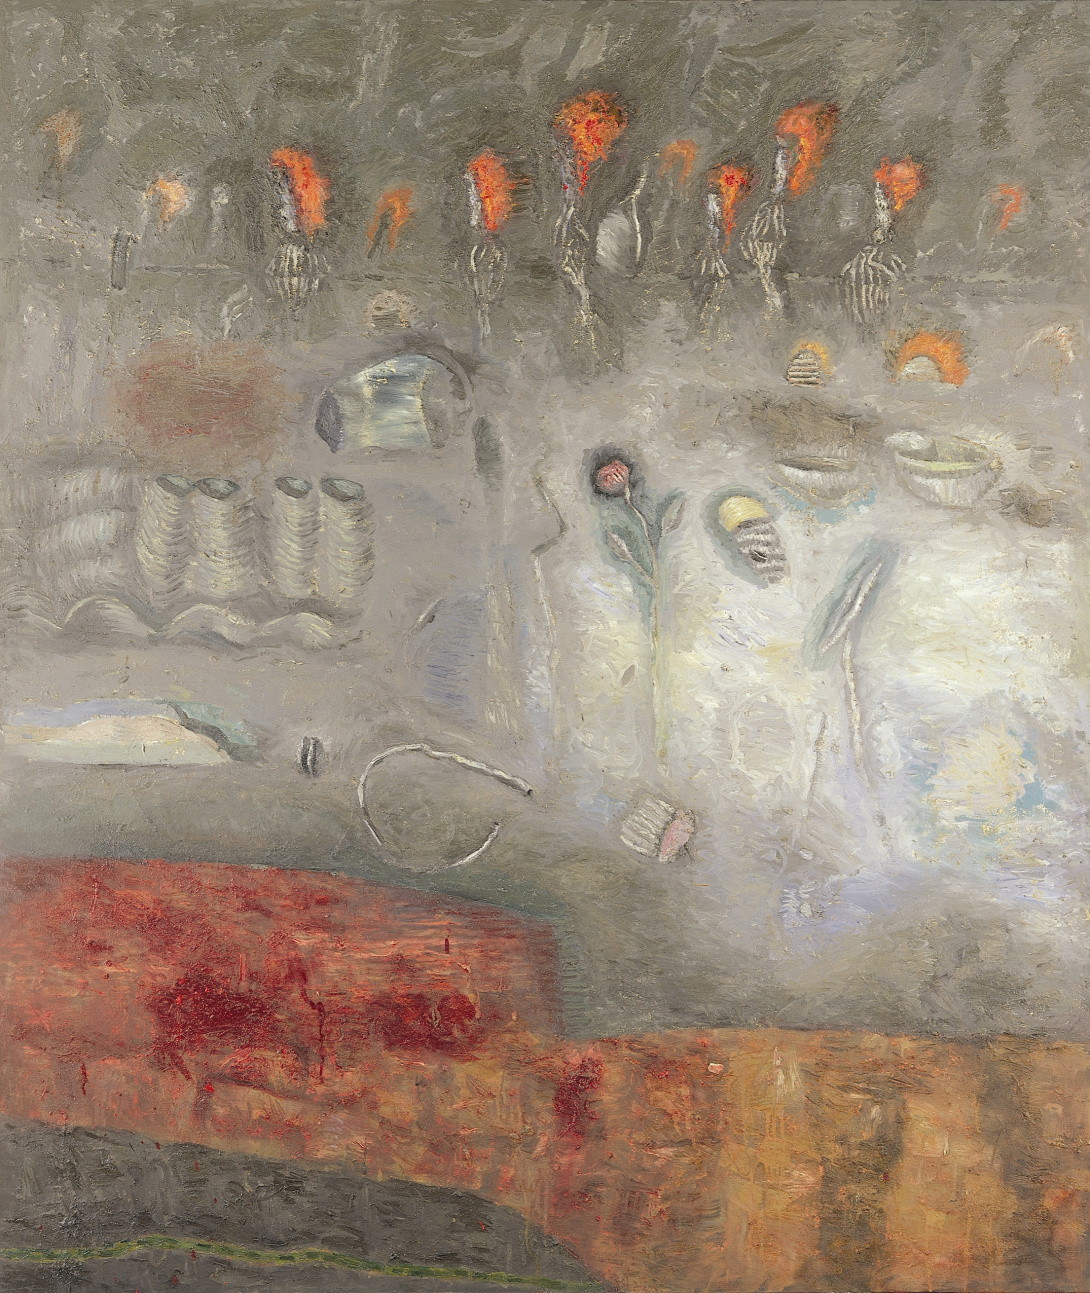 A grey and orange abstract work. The large grey color field has been carefully scraped away to reveal organic shapes and areas of orange which glow through the thick paint.